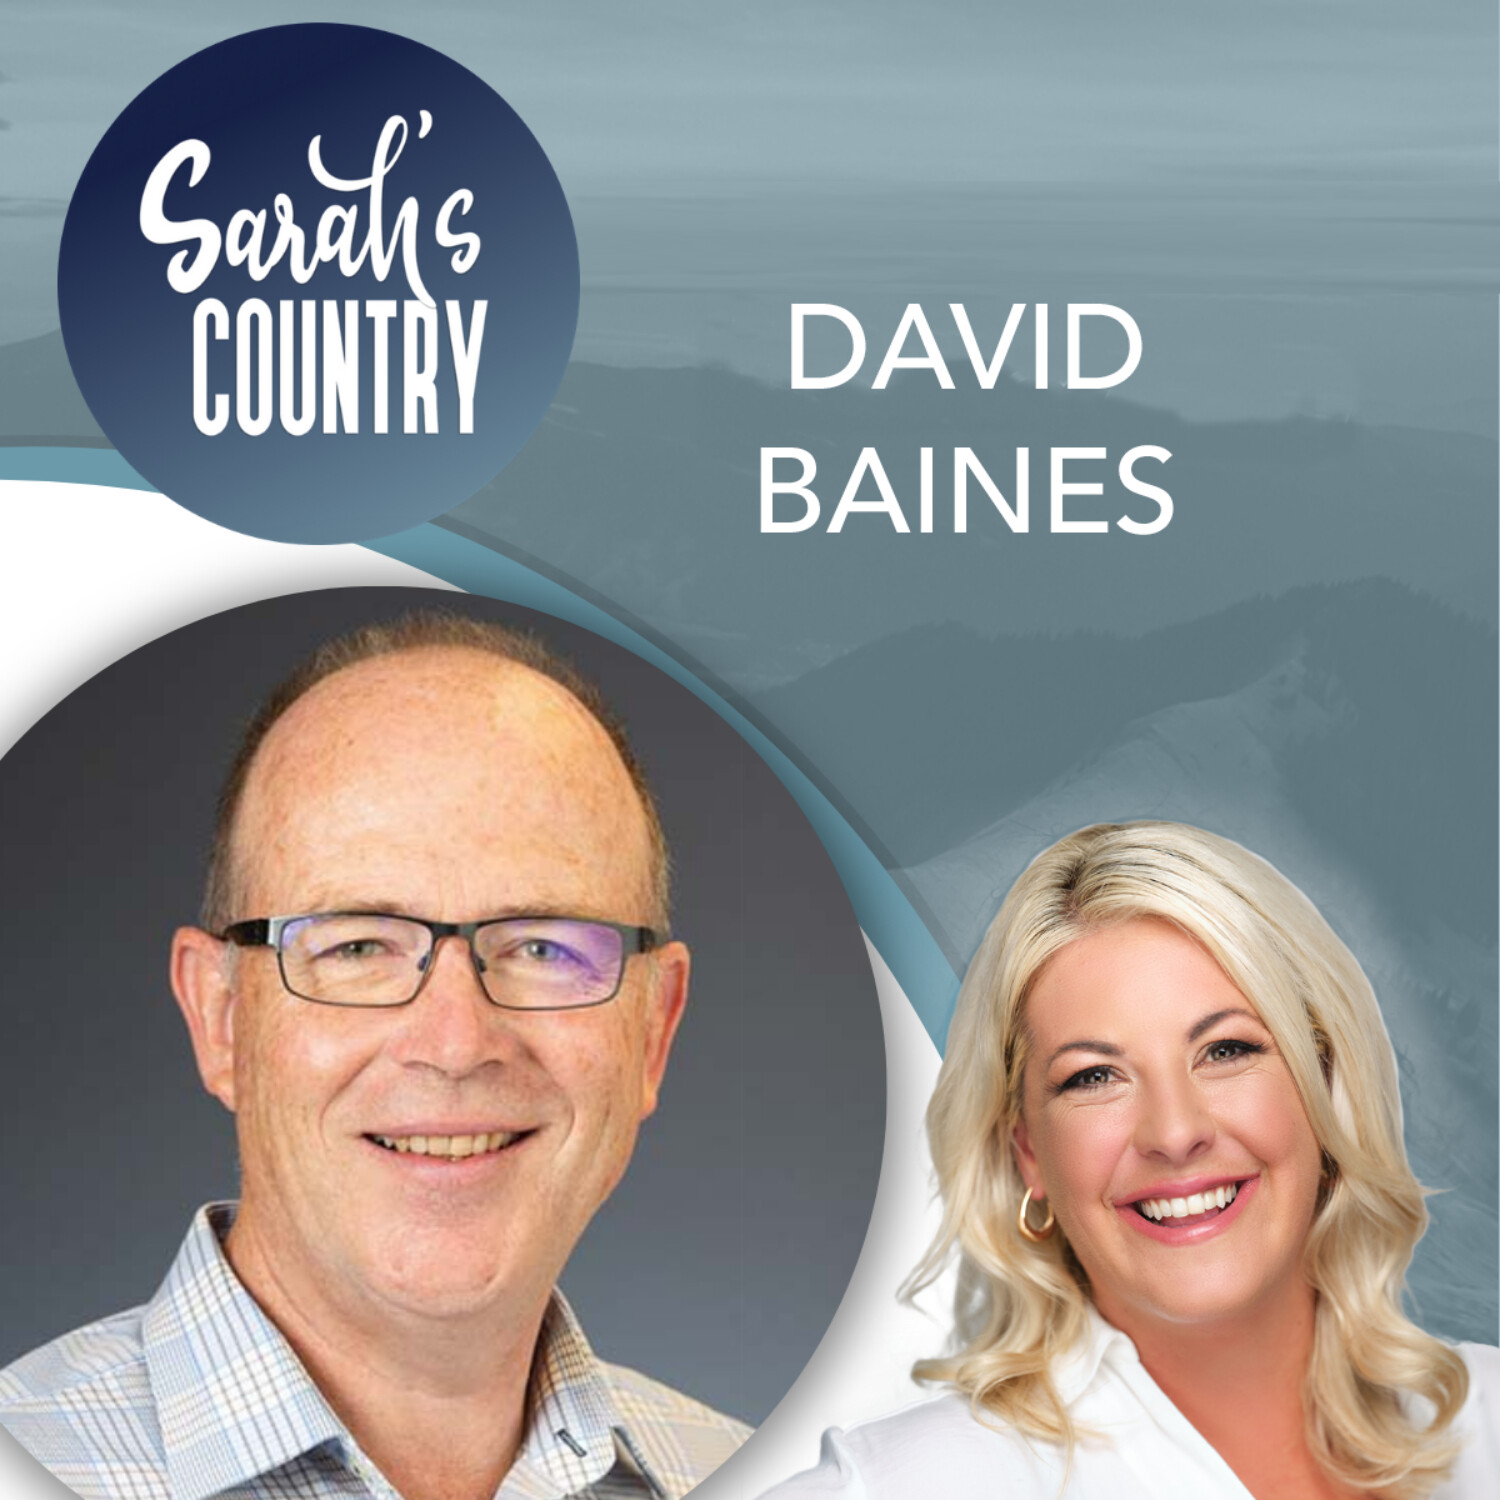 “Kiwis want clear labelling on imported pork” with David Baines